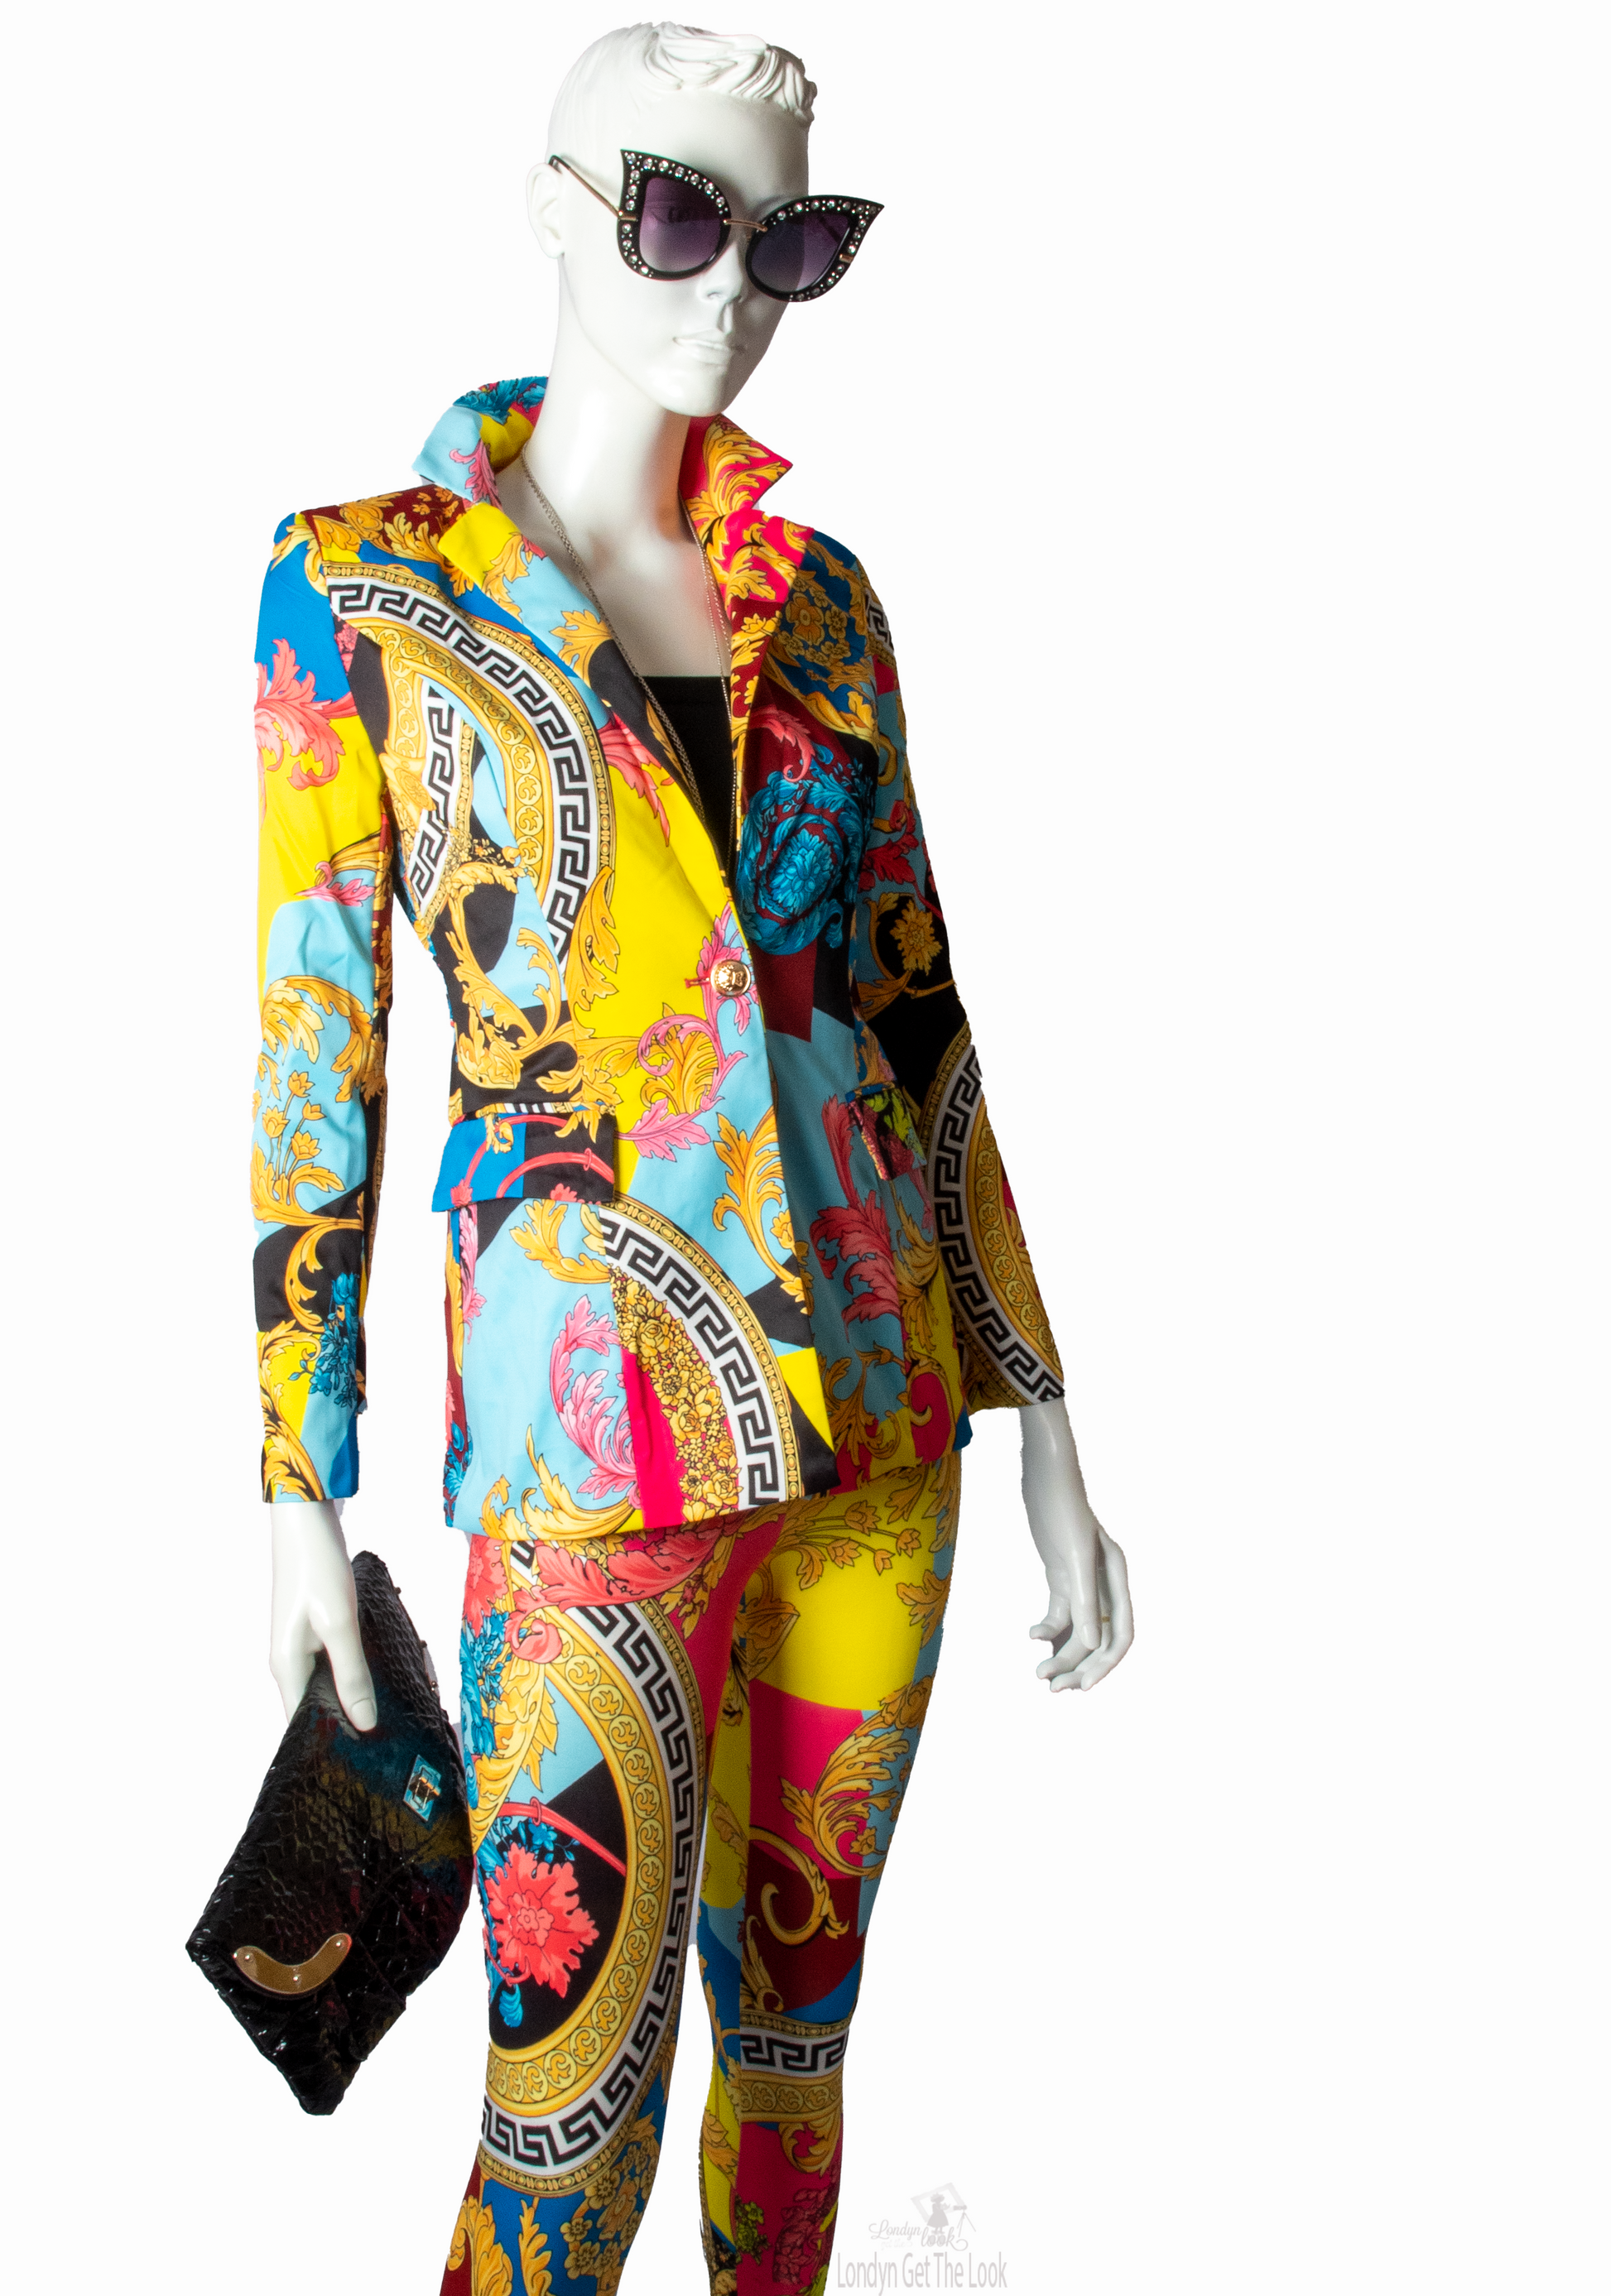 Two Piece Set-Blue Multi Long Sleeve Print Jacket With Collar, Two Side Pockets  Matches With Skinny Fitted Print Pants